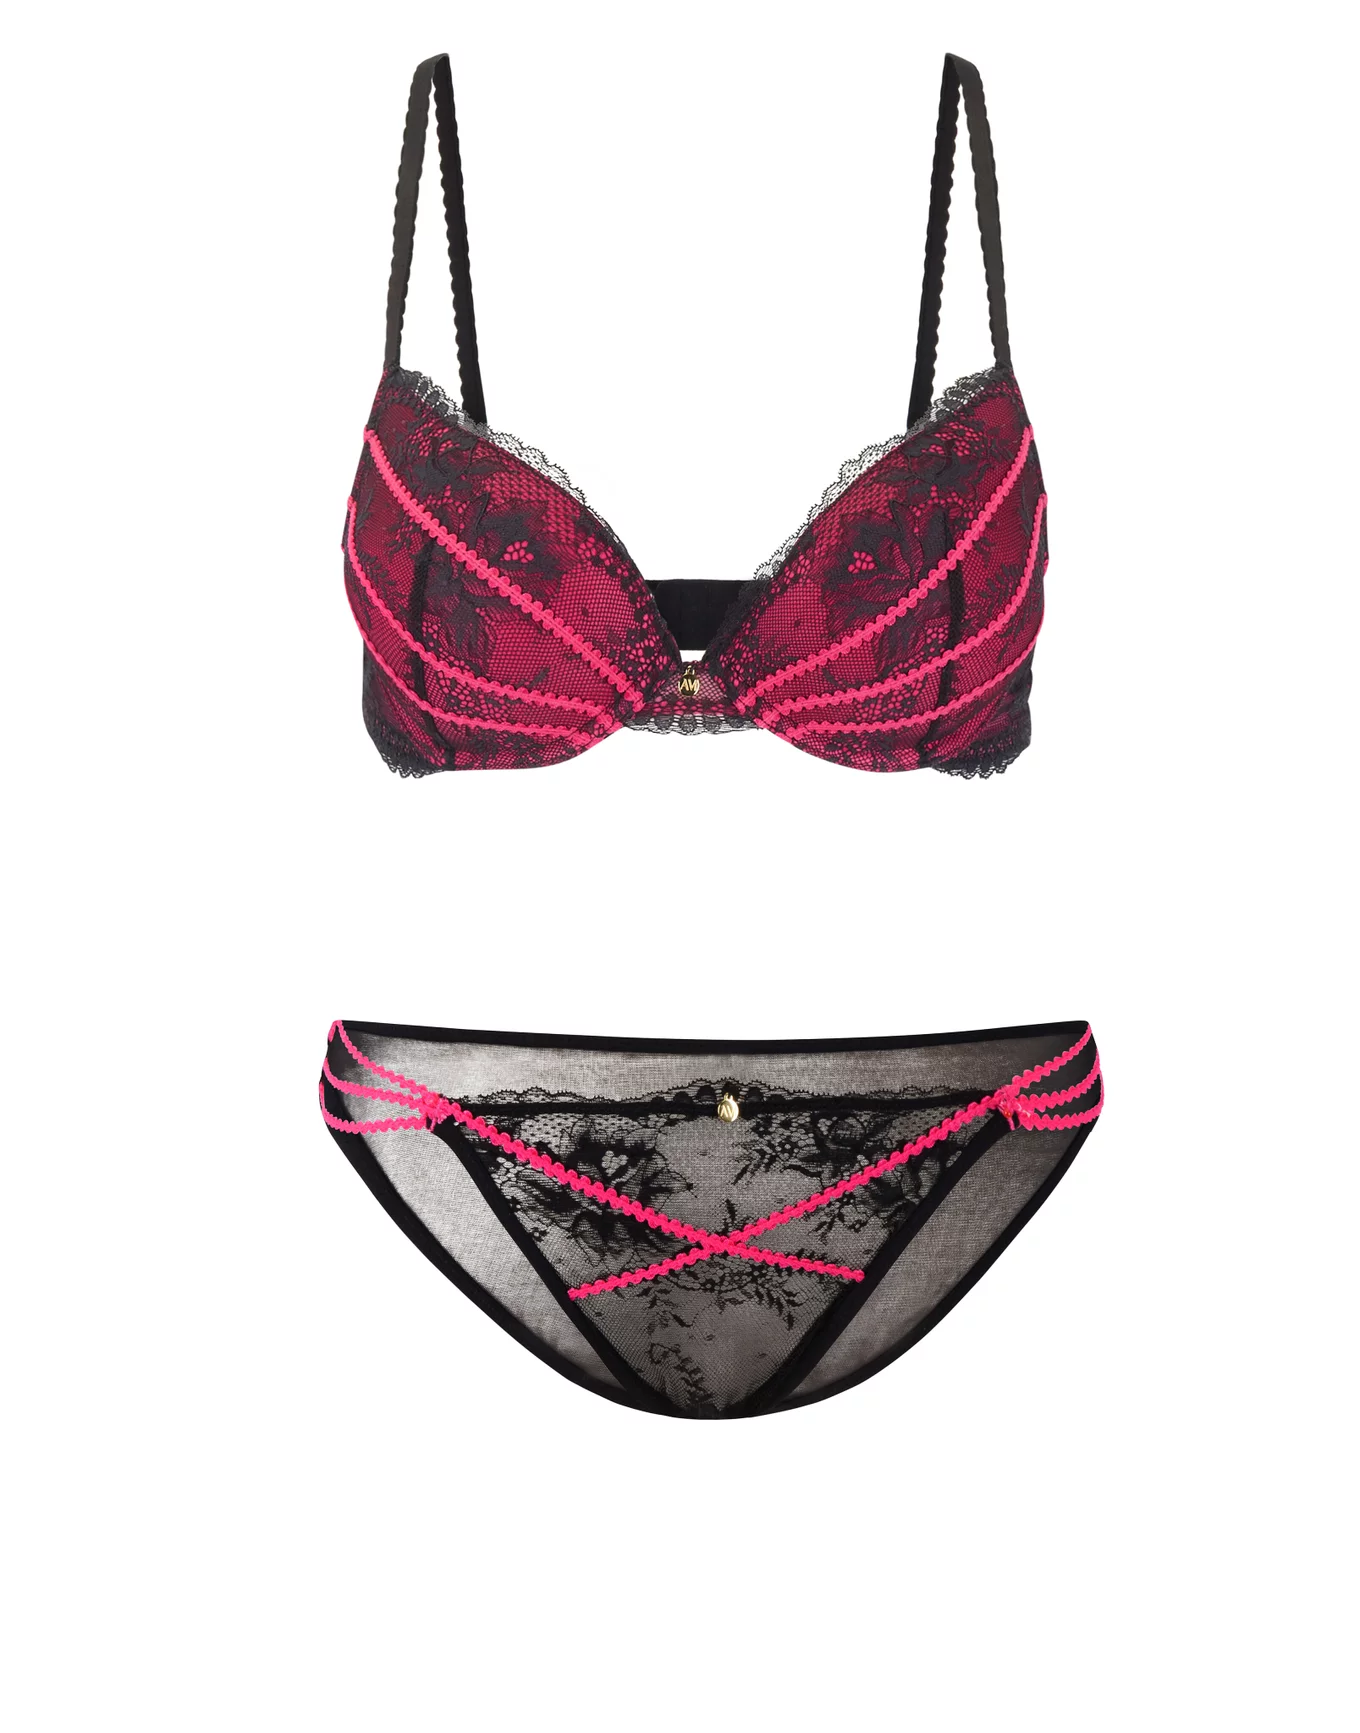 Women's Lingerie, Lace & Mesh Sets - Black, Red, Pink & more